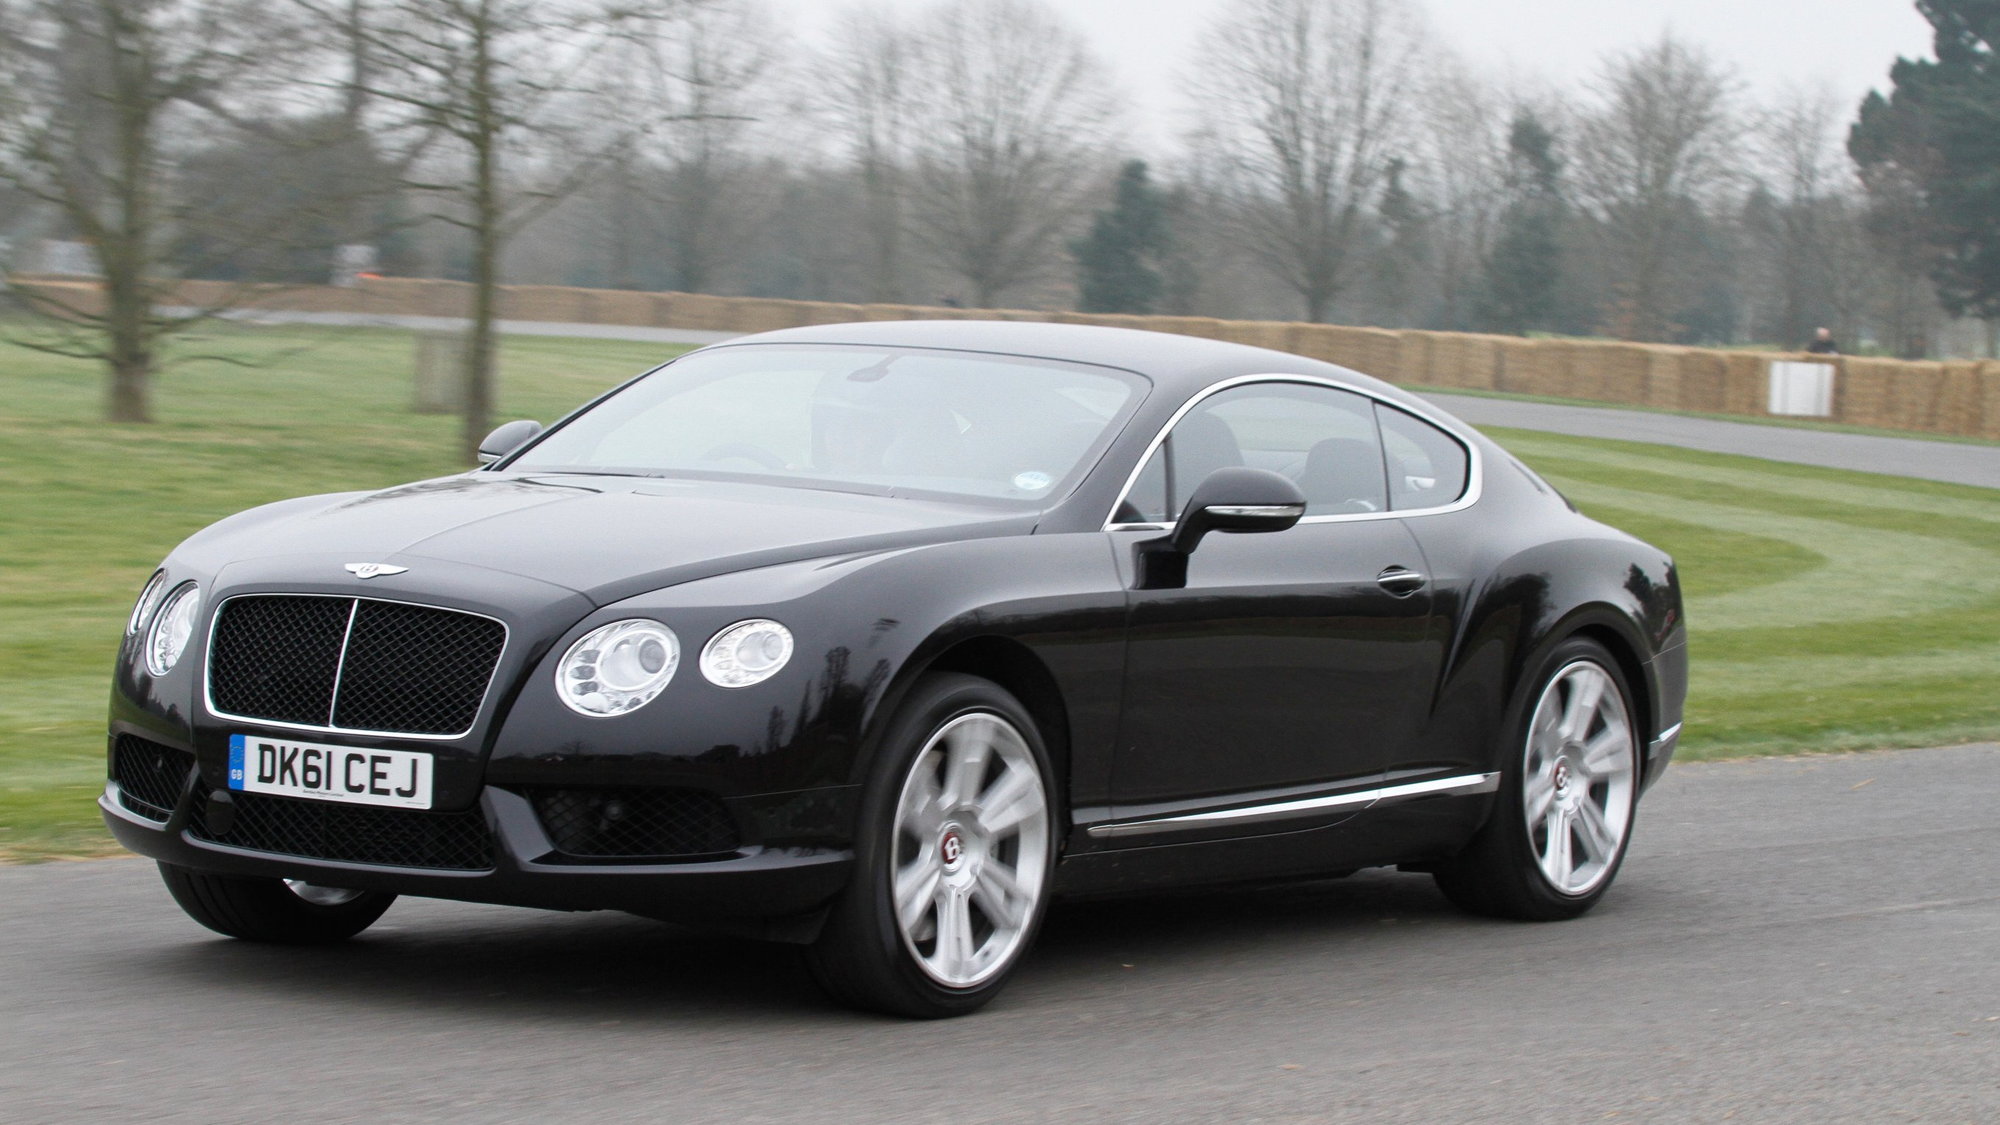 Bentley at Goodwood March 2012